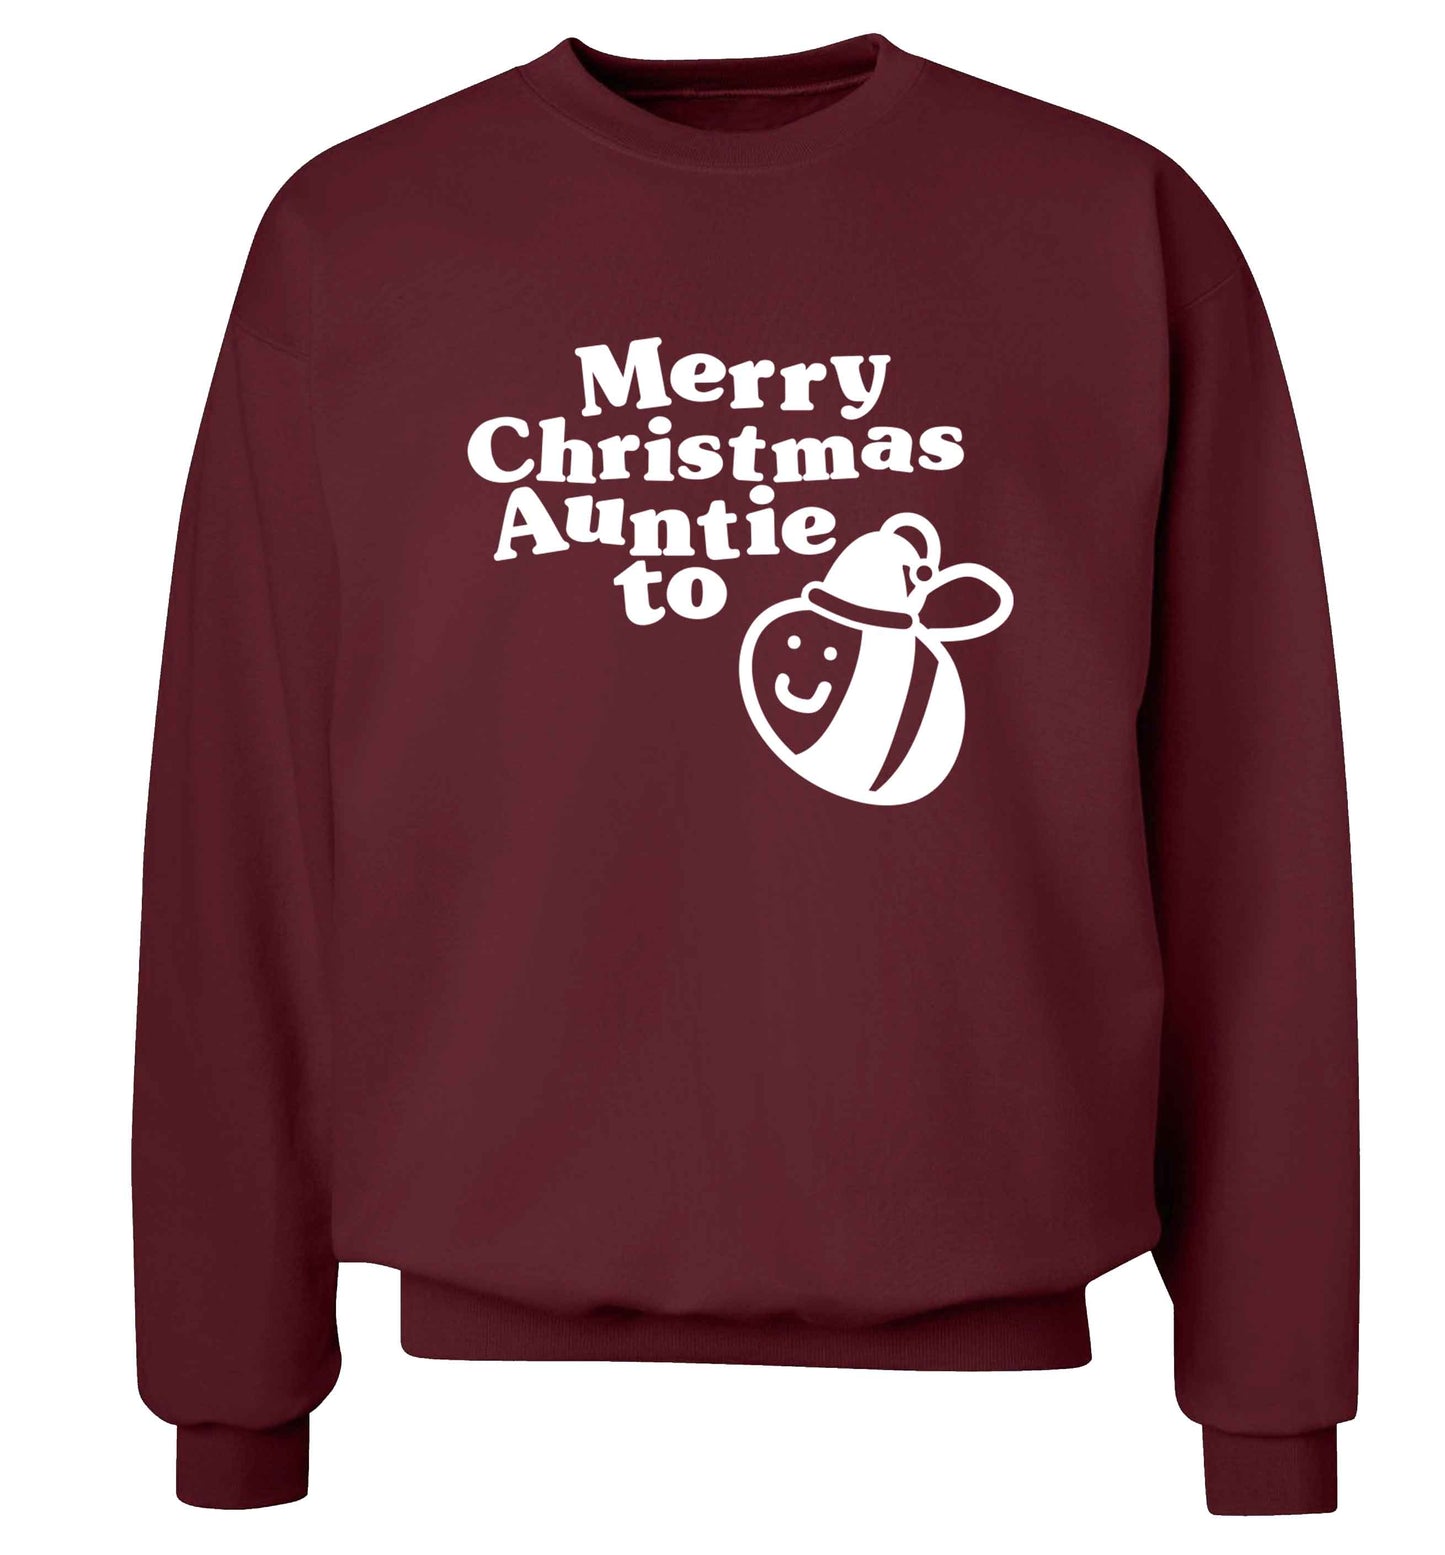 Merry Christmas auntie to be Adult's unisex maroon Sweater 2XL